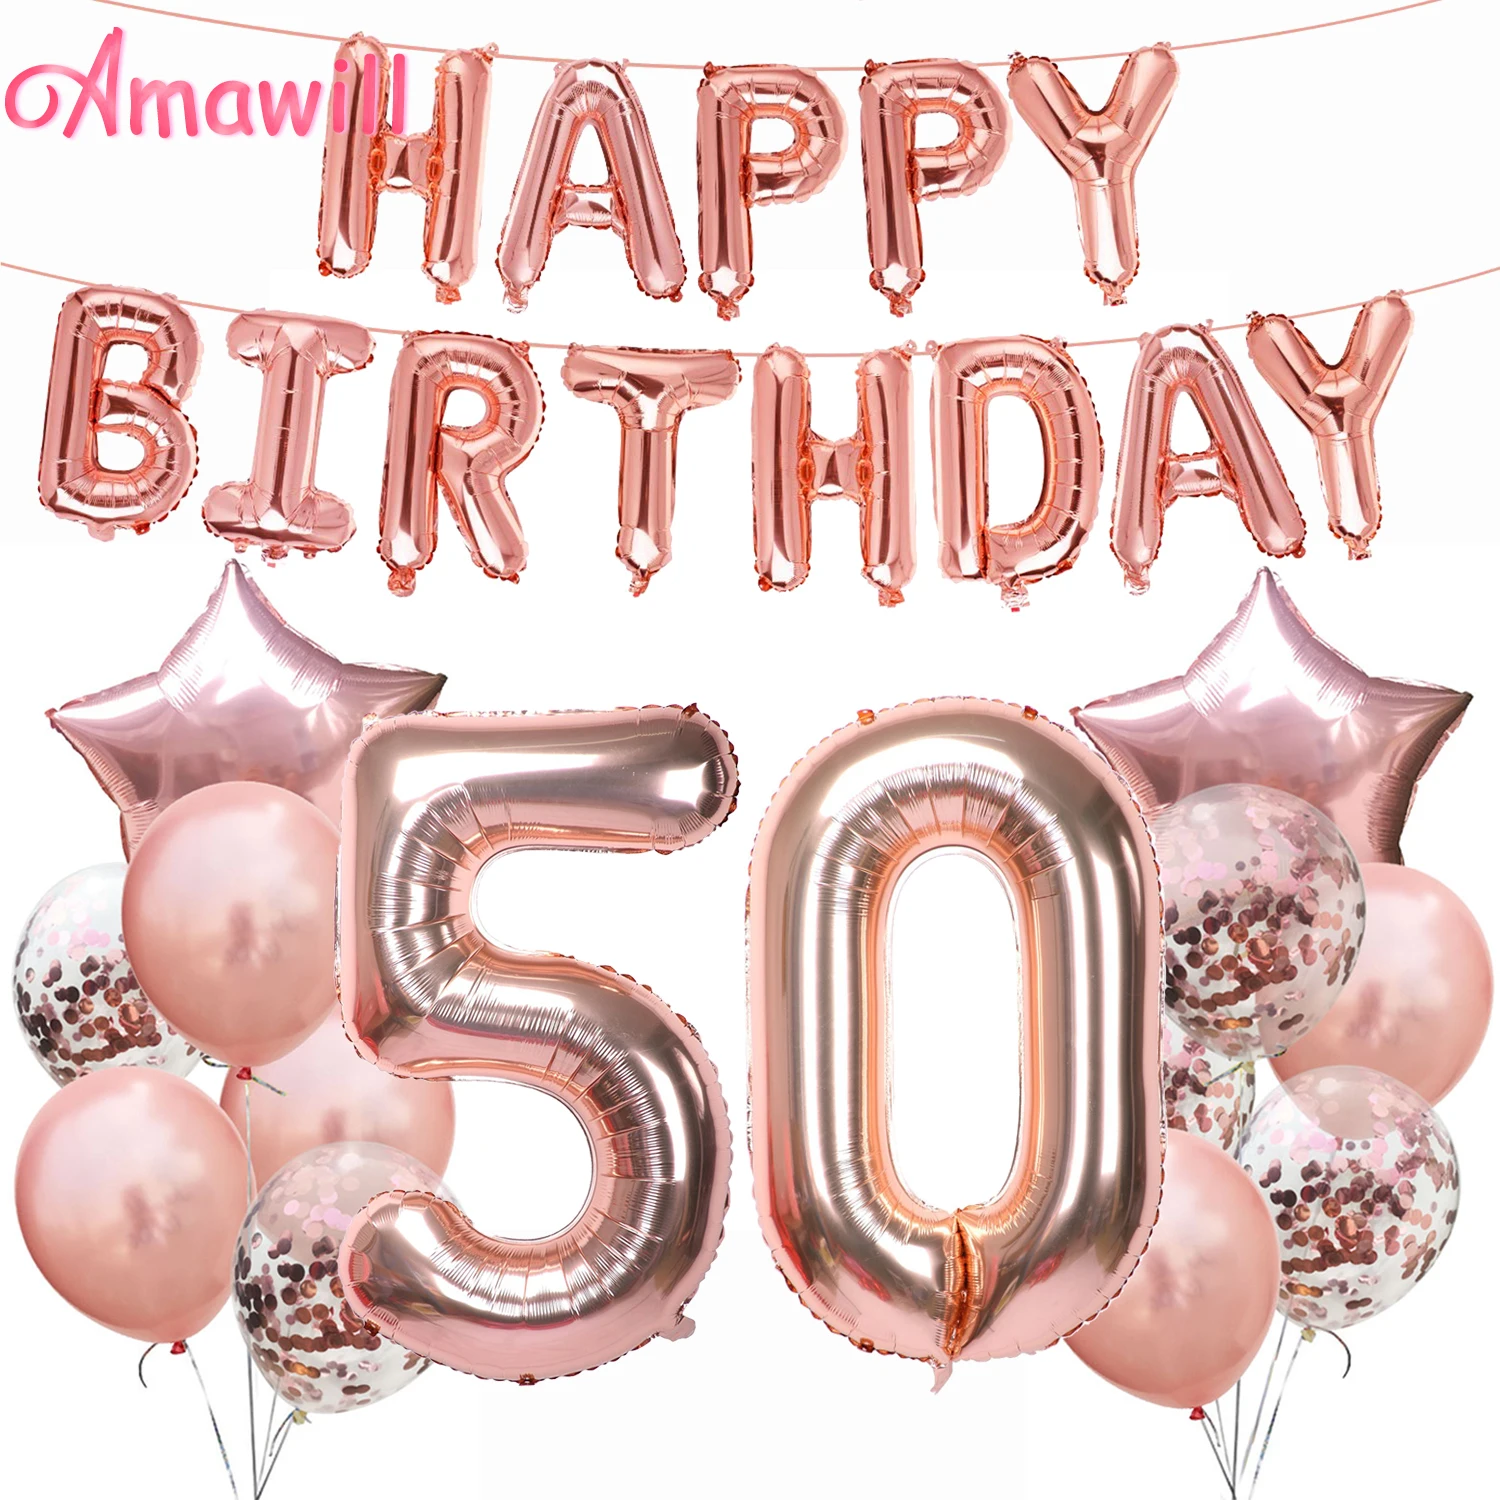 Amawill Rose Gold Adult 50th Happy Birthday Foil Balloon Birthday Party Decorations 50 Years Old Anniversary Supplies 75D